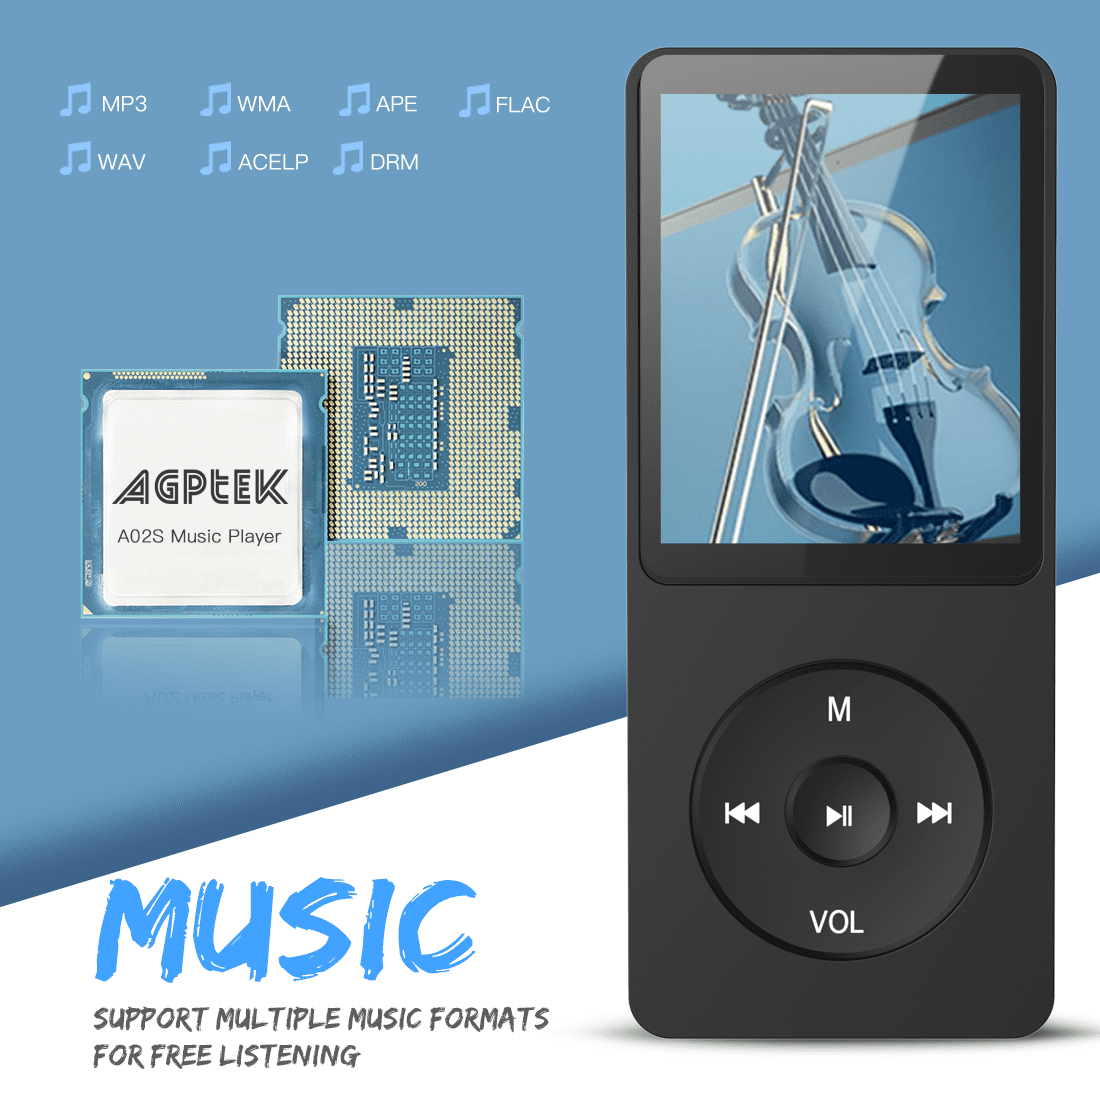 Agptek A02s 16gb Mp3 Player Lossless Sound Music Player With Micro Sd Card Slot Black Walmart Com Walmart Com - download mp3 sans song roblox id code 2018 free